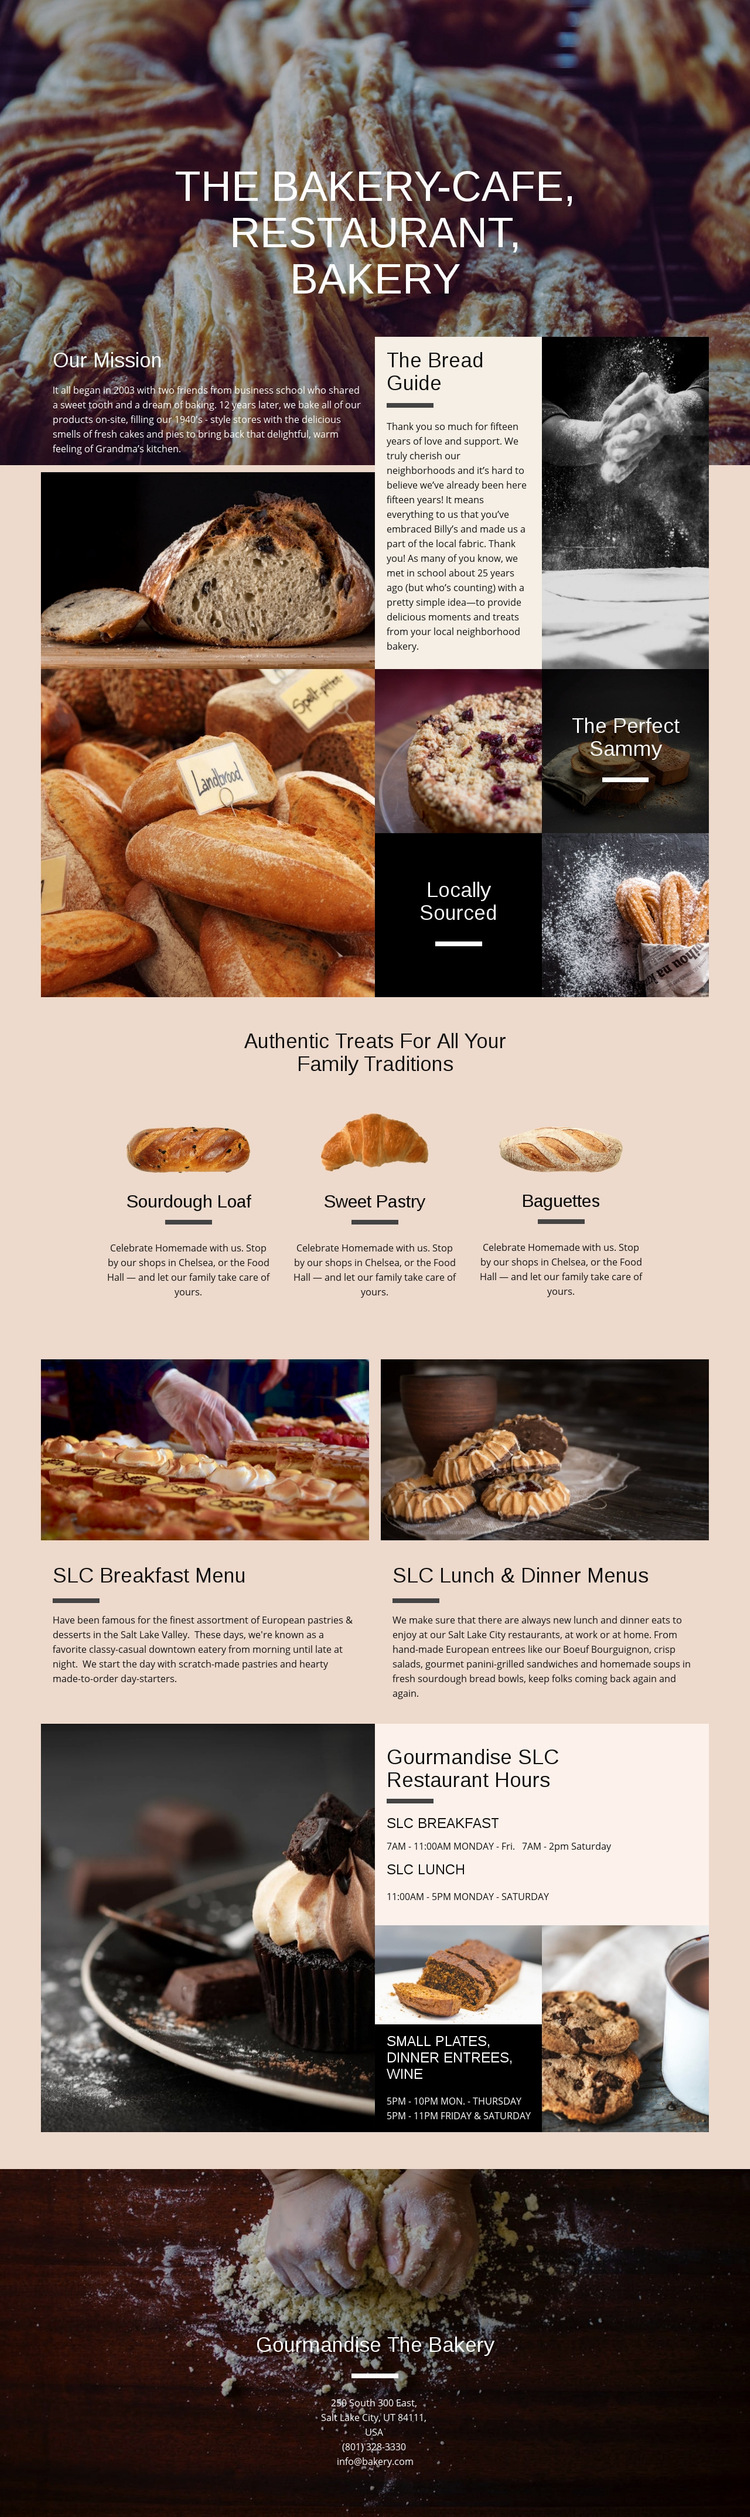 The Bakery Web Page Design